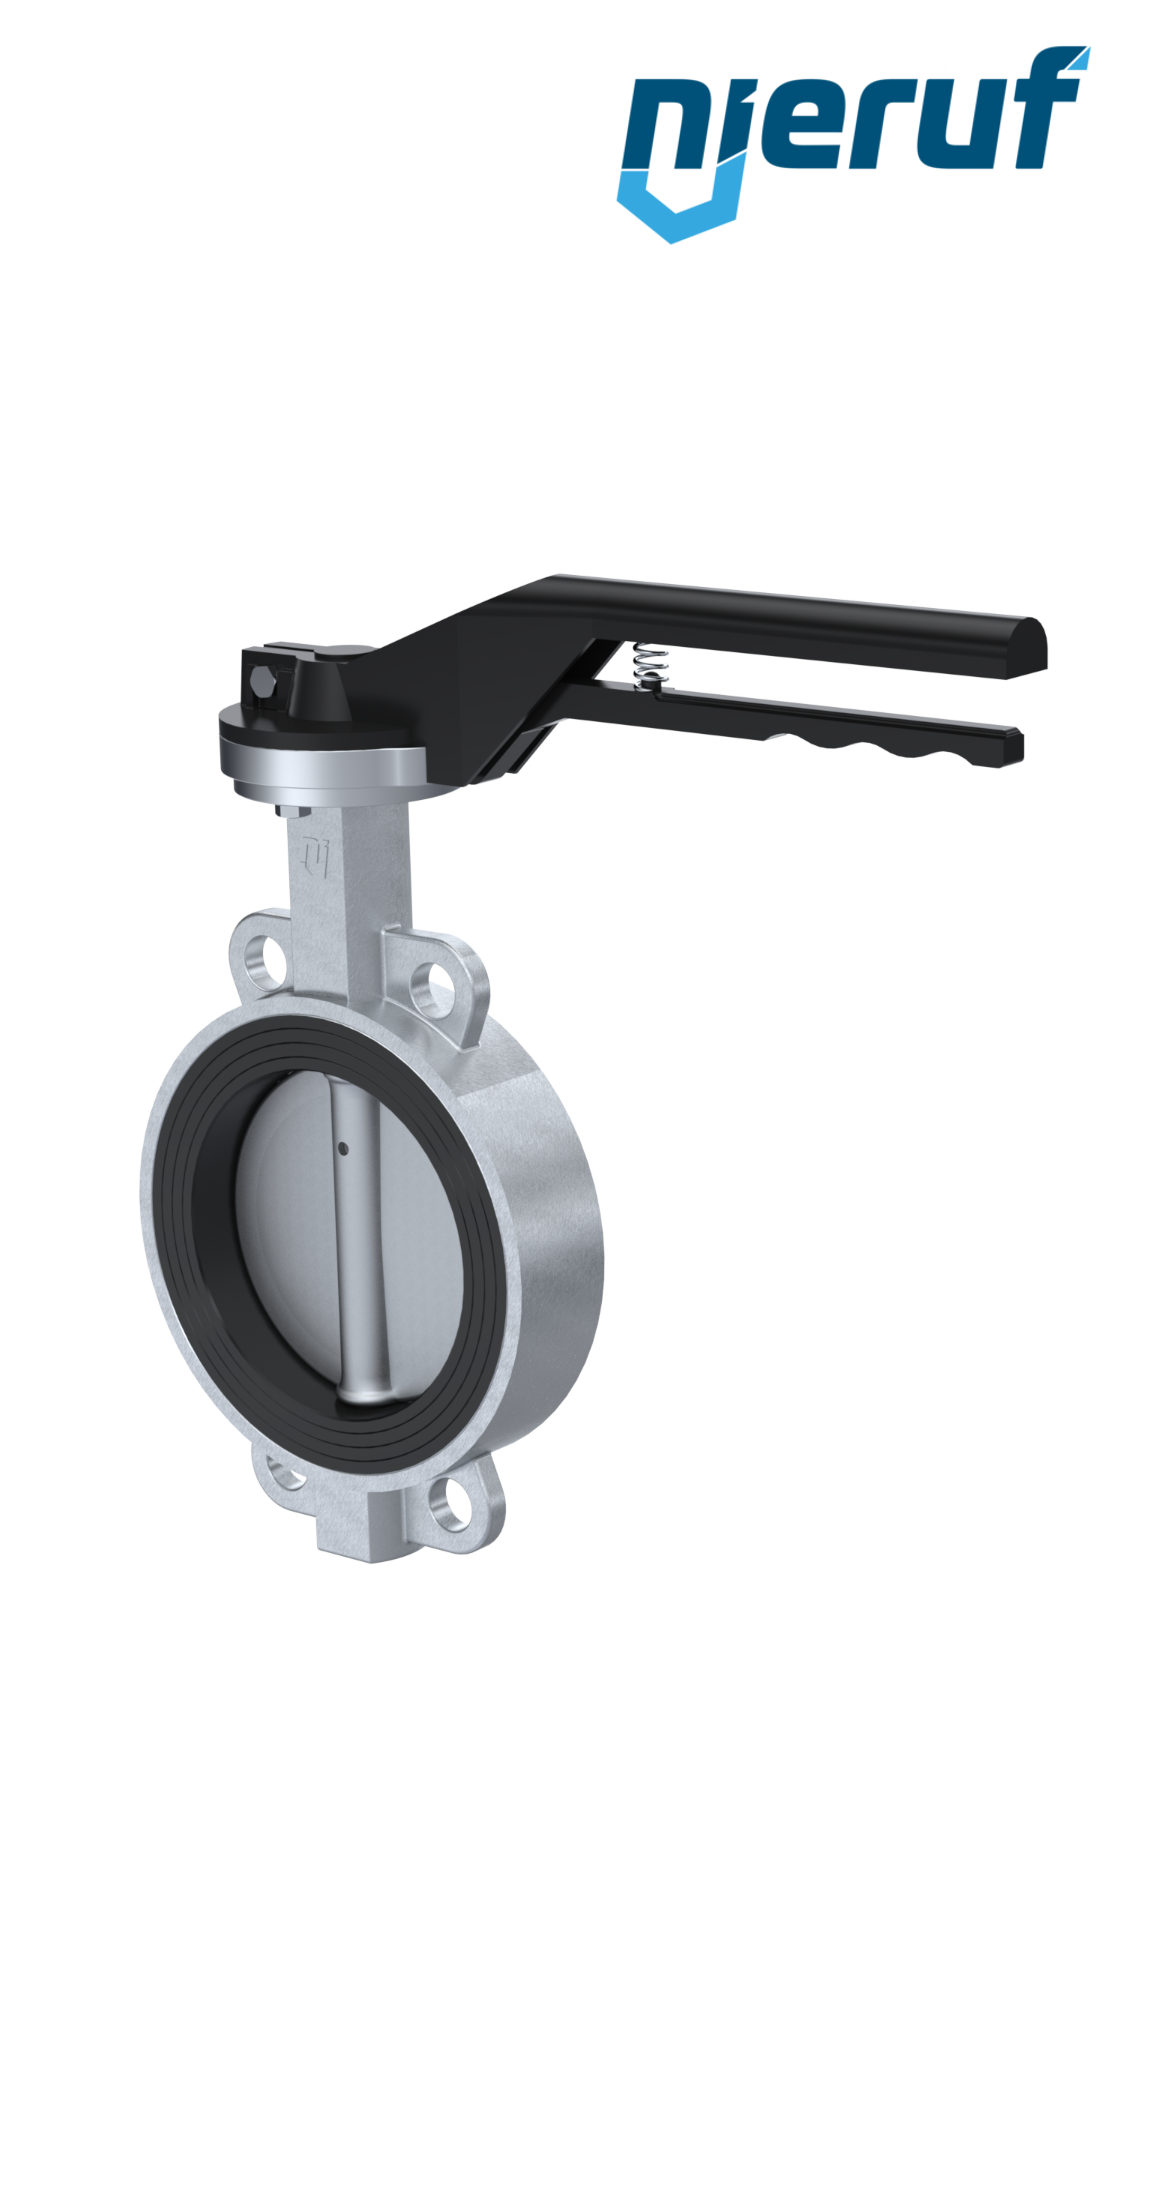 Butterfly-valve-stainless-steel DN 200 PN16 AK08 EPDM notch lever